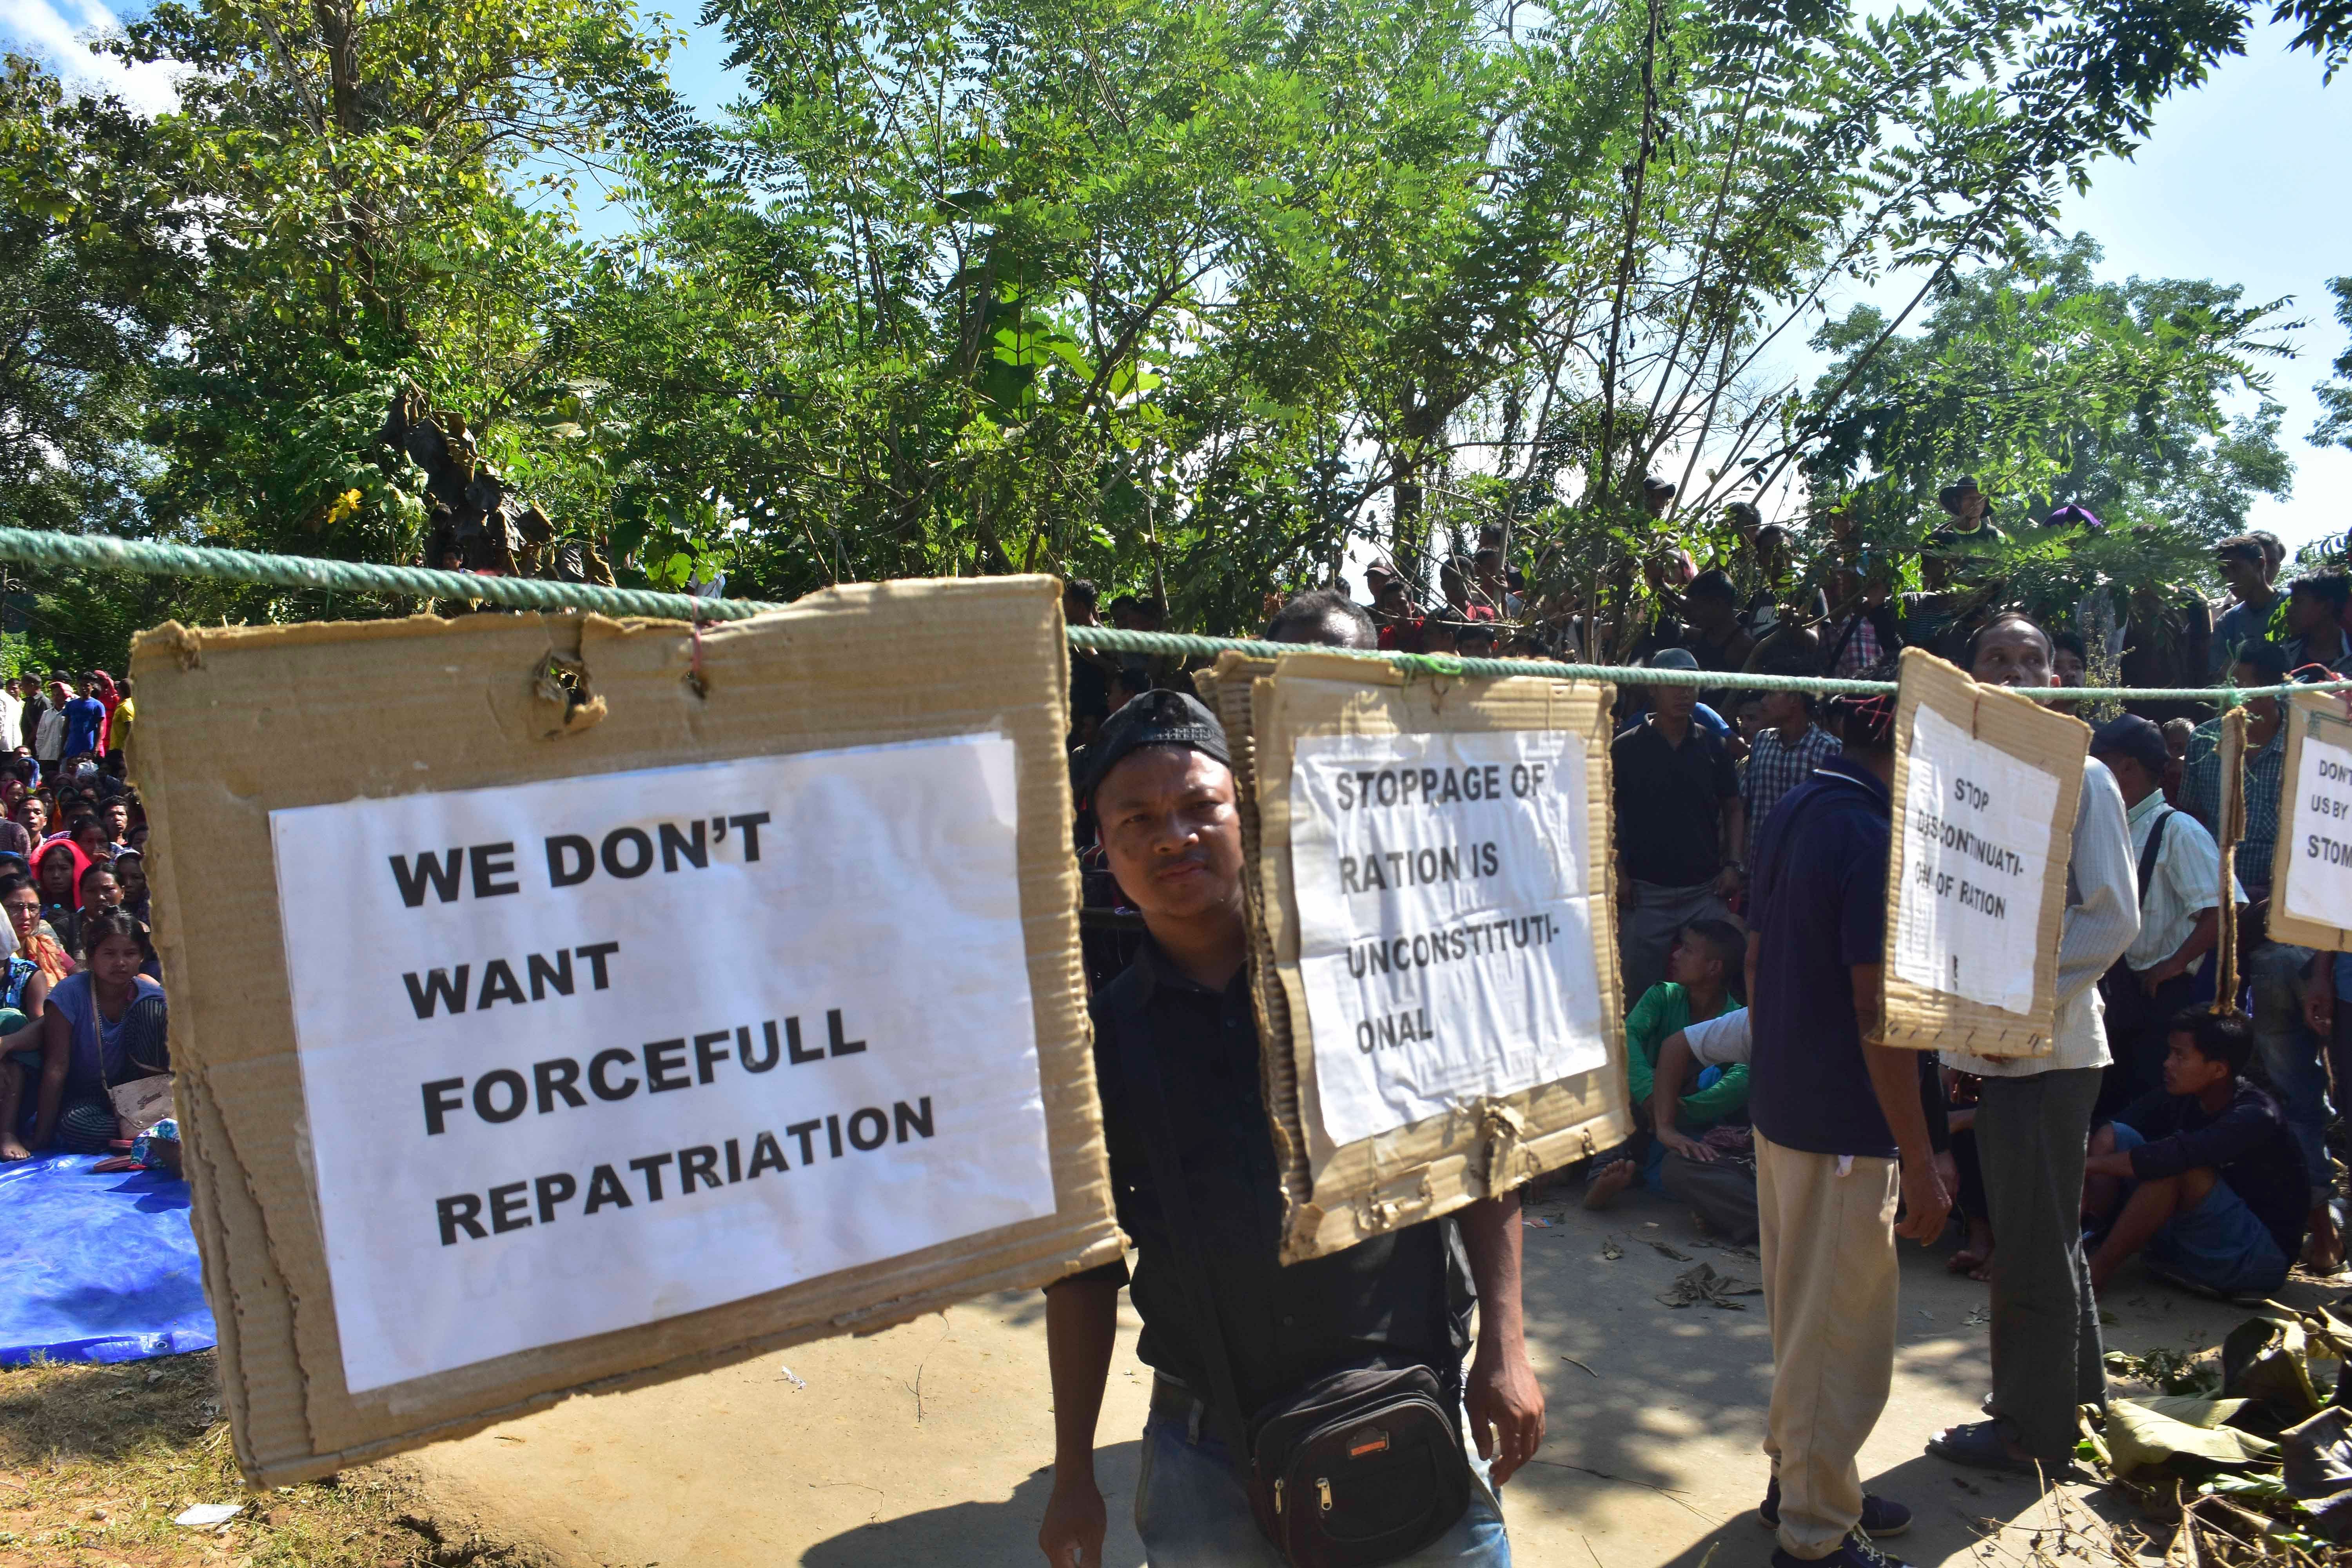 Brus refugees staging a protest against near their relief camps in Tripura North district against "forceful repatriation" to Mizoram. (Photo by Tanmoy Chakraborty in Agartala)